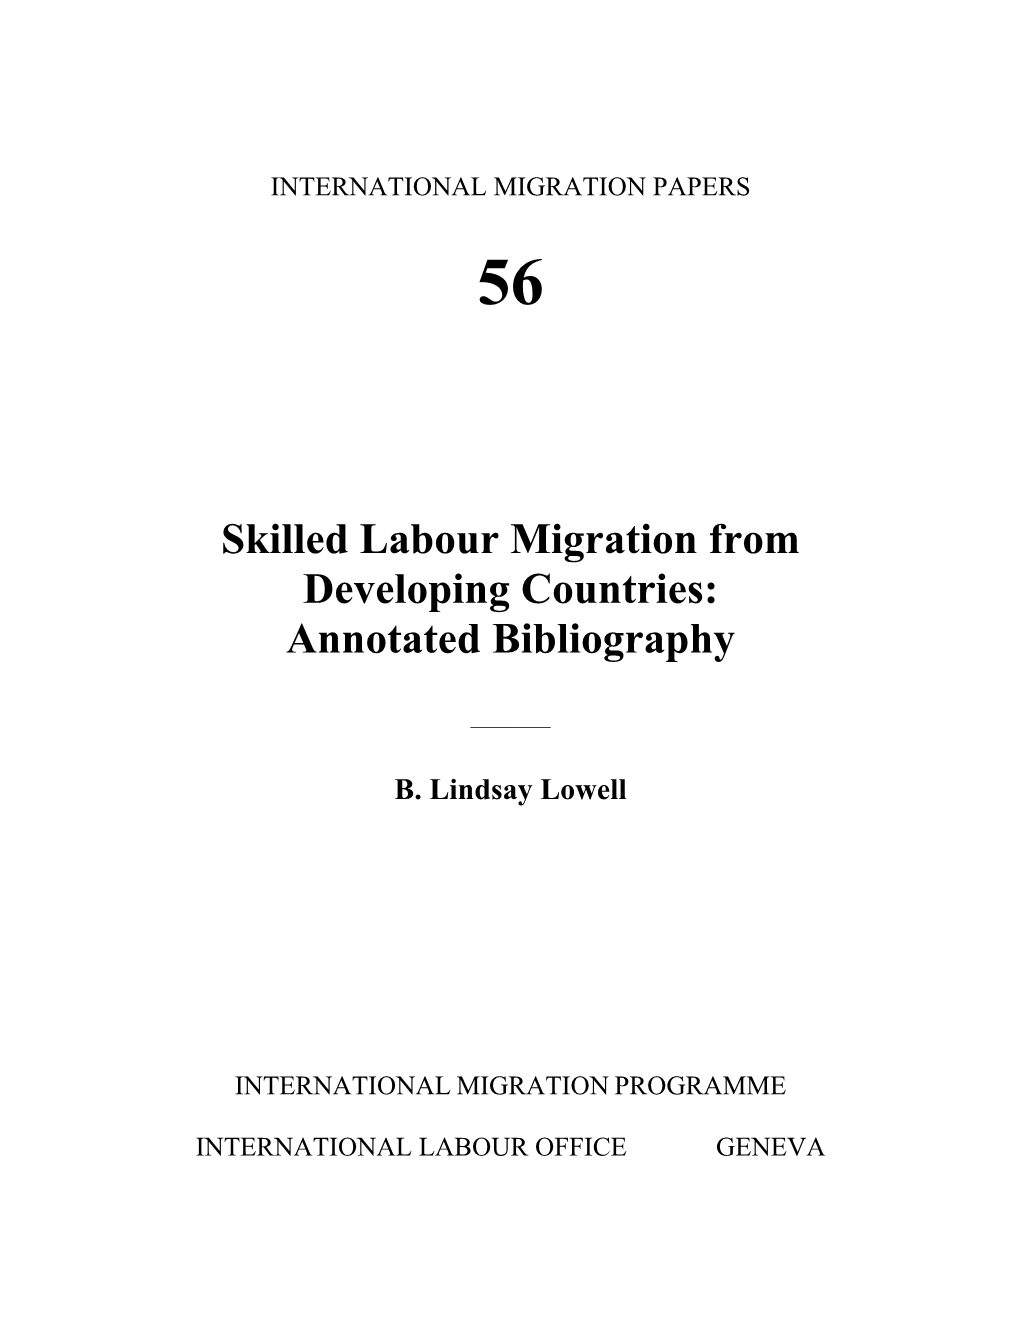 Skilled Labour Migration from Developing Countries: Annotated Bibliography